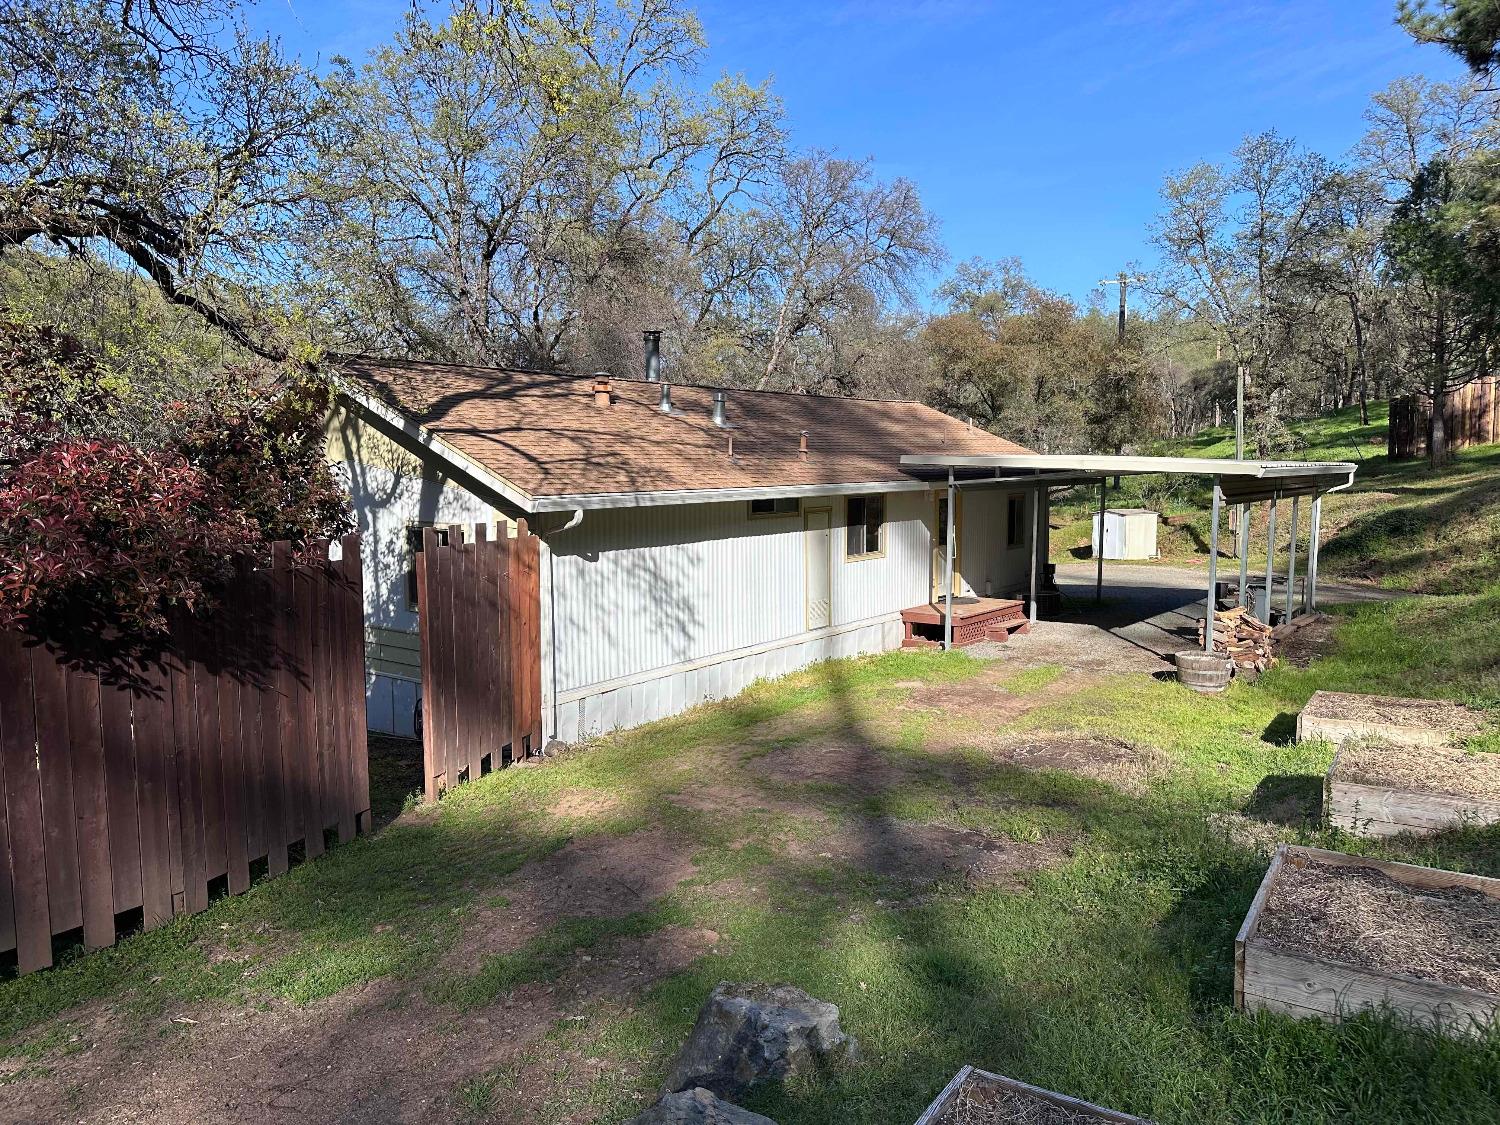 Photo of 11393 Tom Ray Rd in Grass Valley, CA